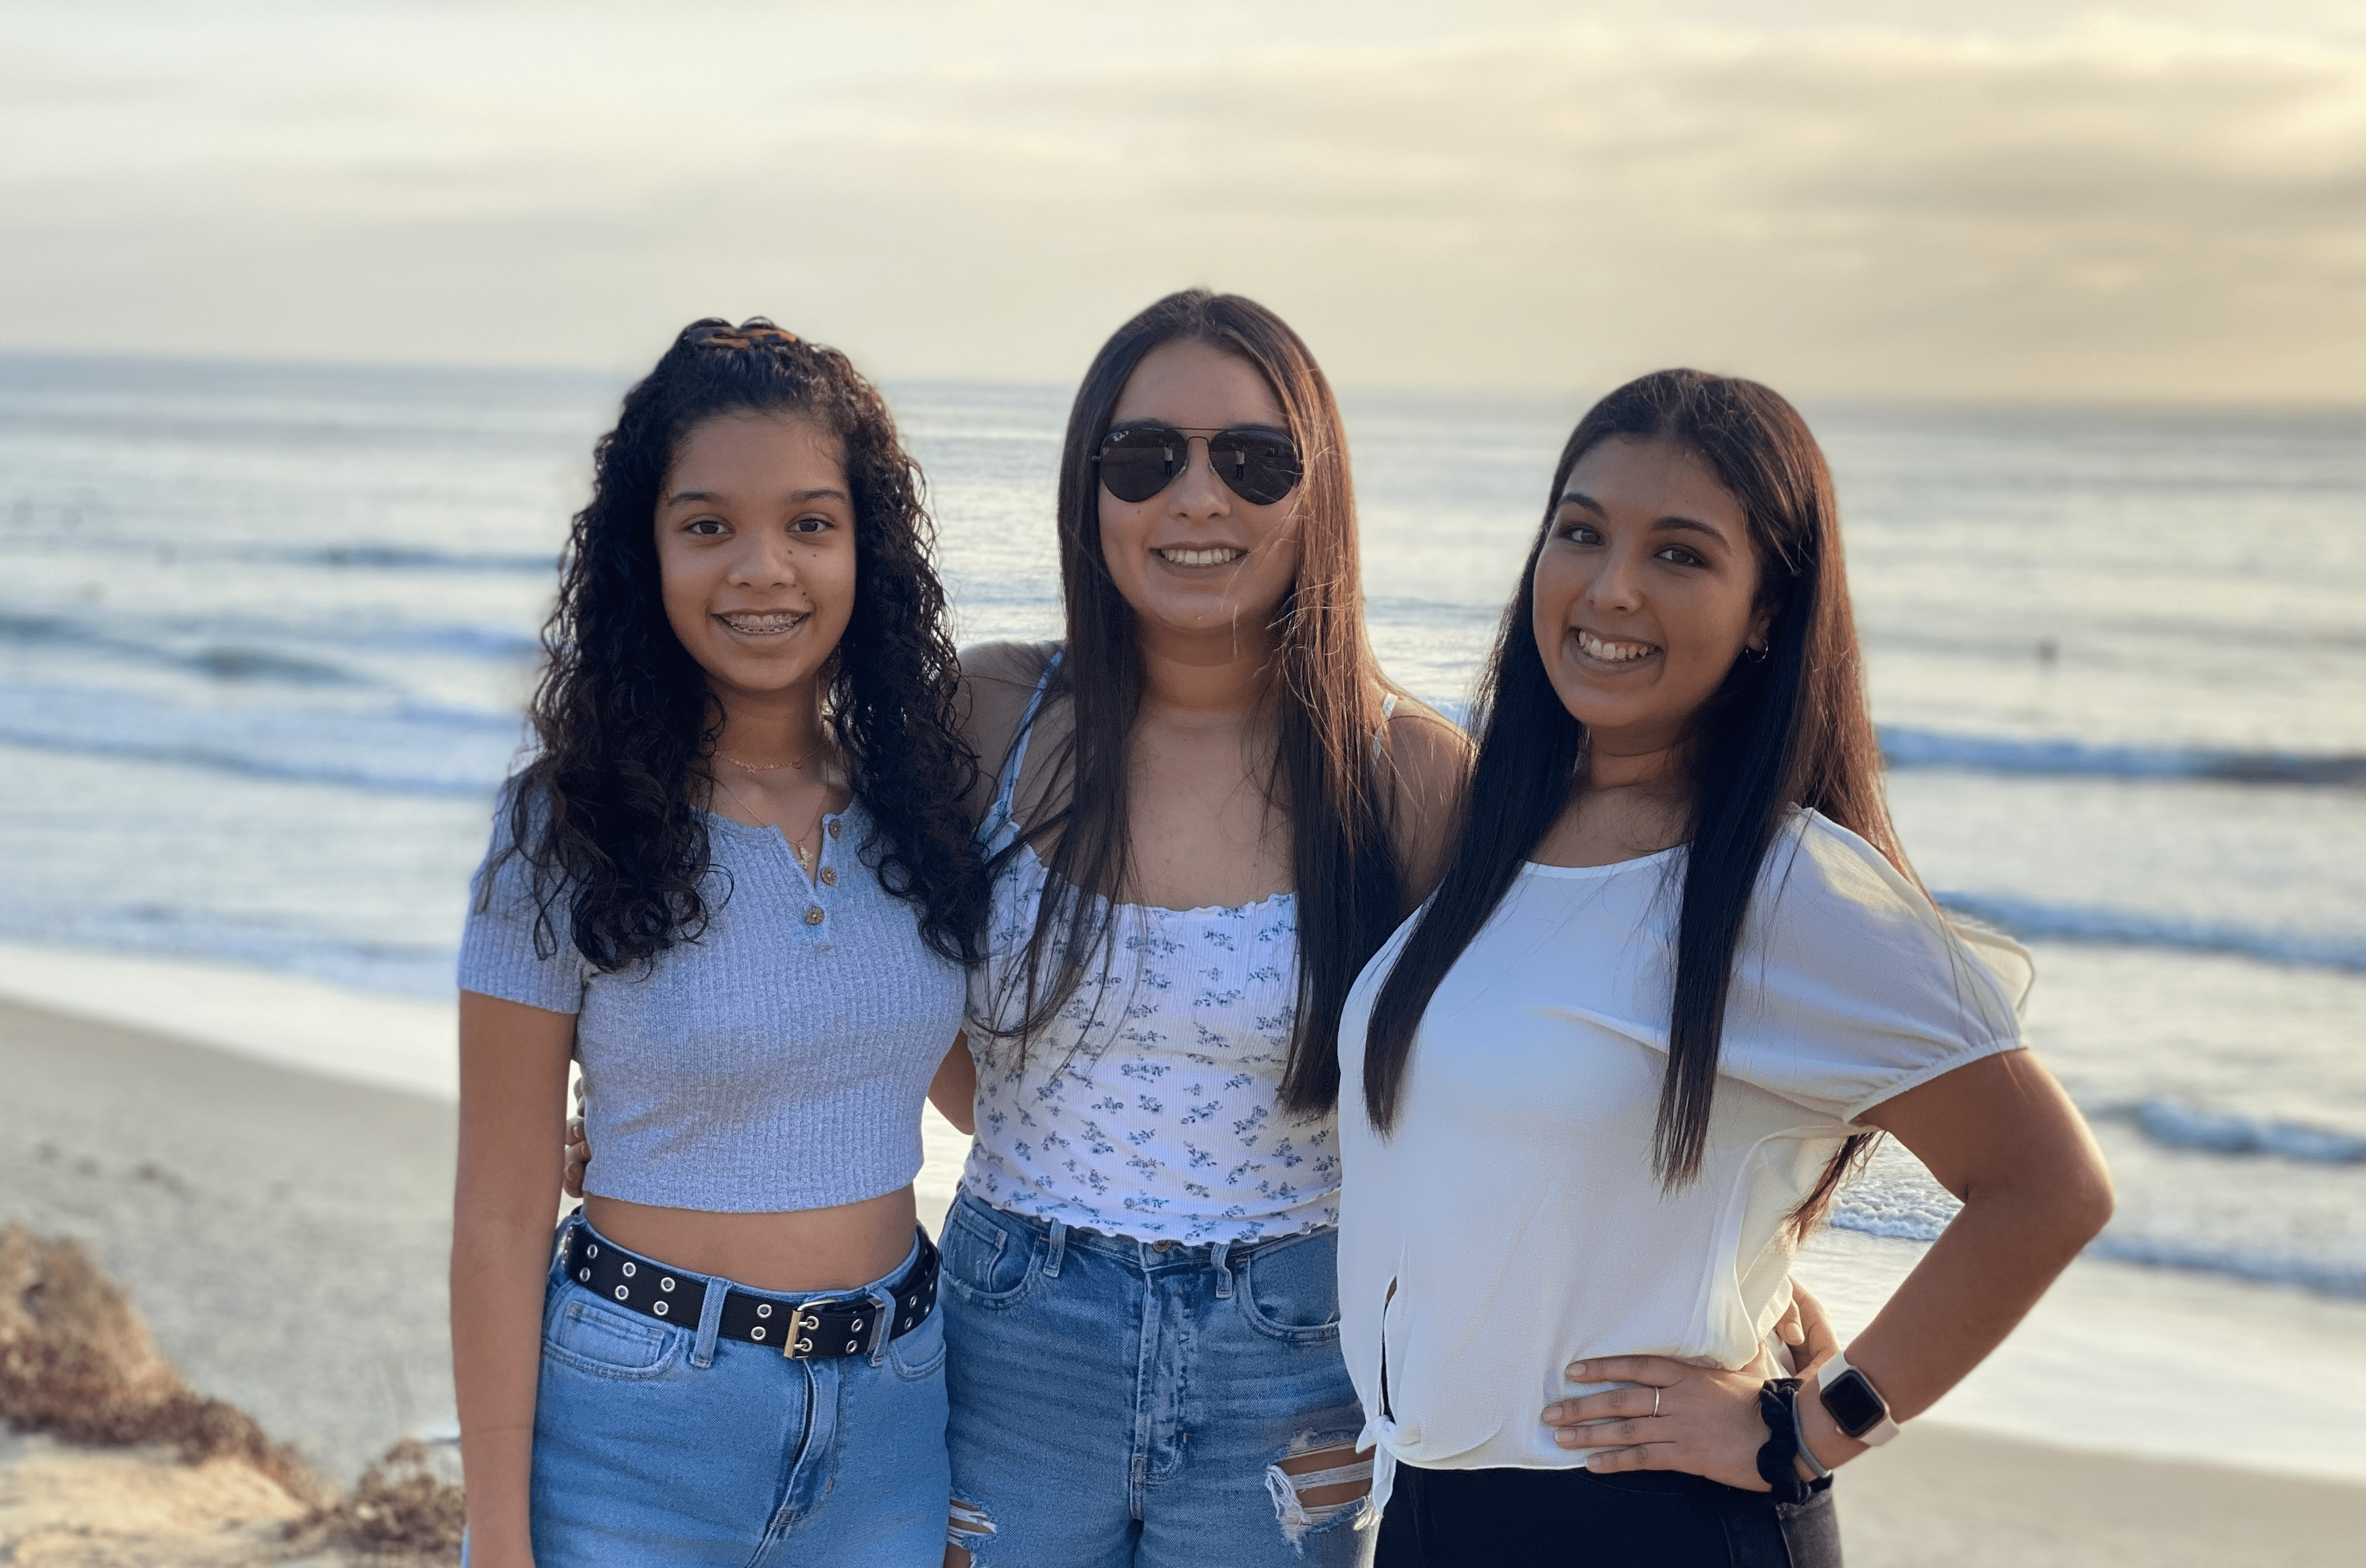 Three girls smiling at the camera on the beach at sunset.